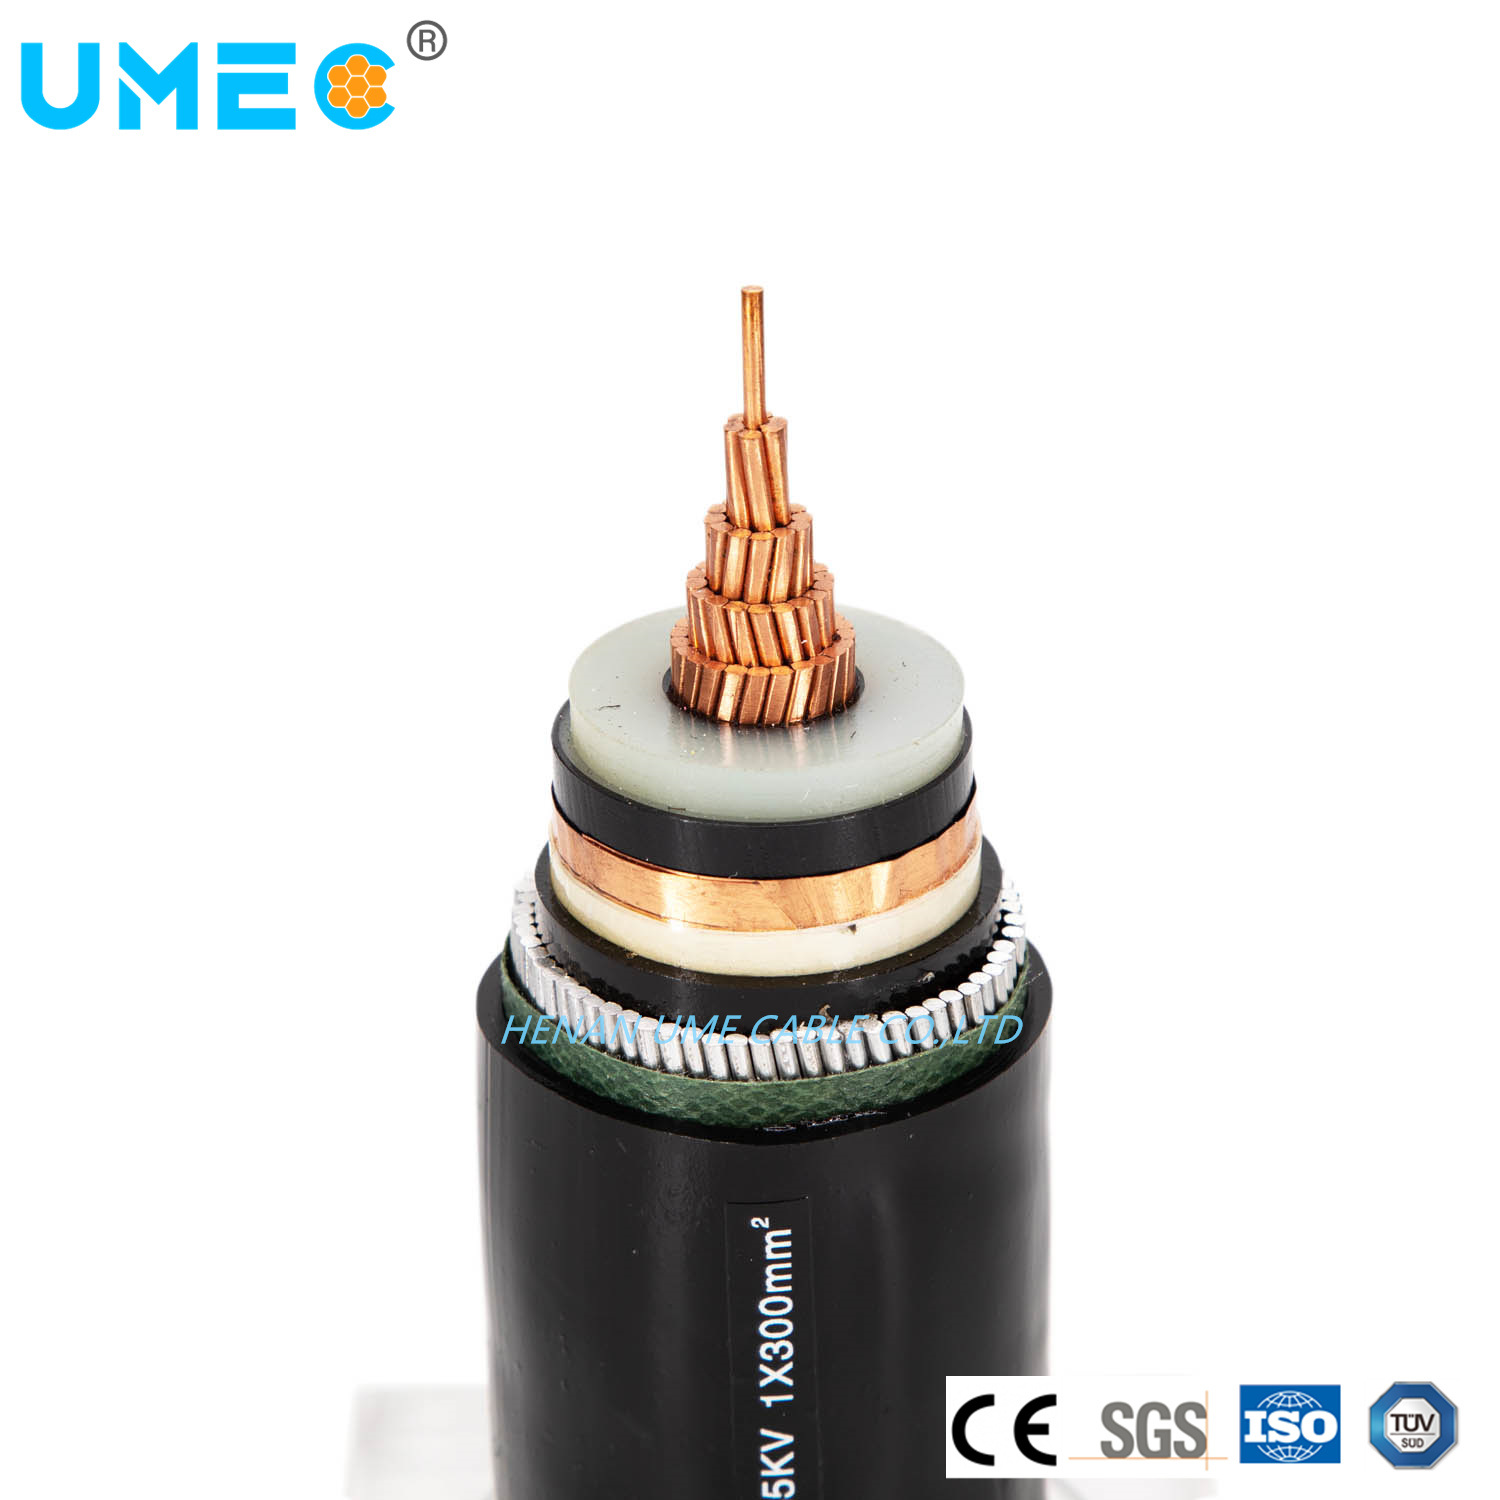 Qualified Utility Medium Voltage Cu (Al) Conductor PVC/XLPE Insulated PVC Sheathed Steel Wire Armoured Cable